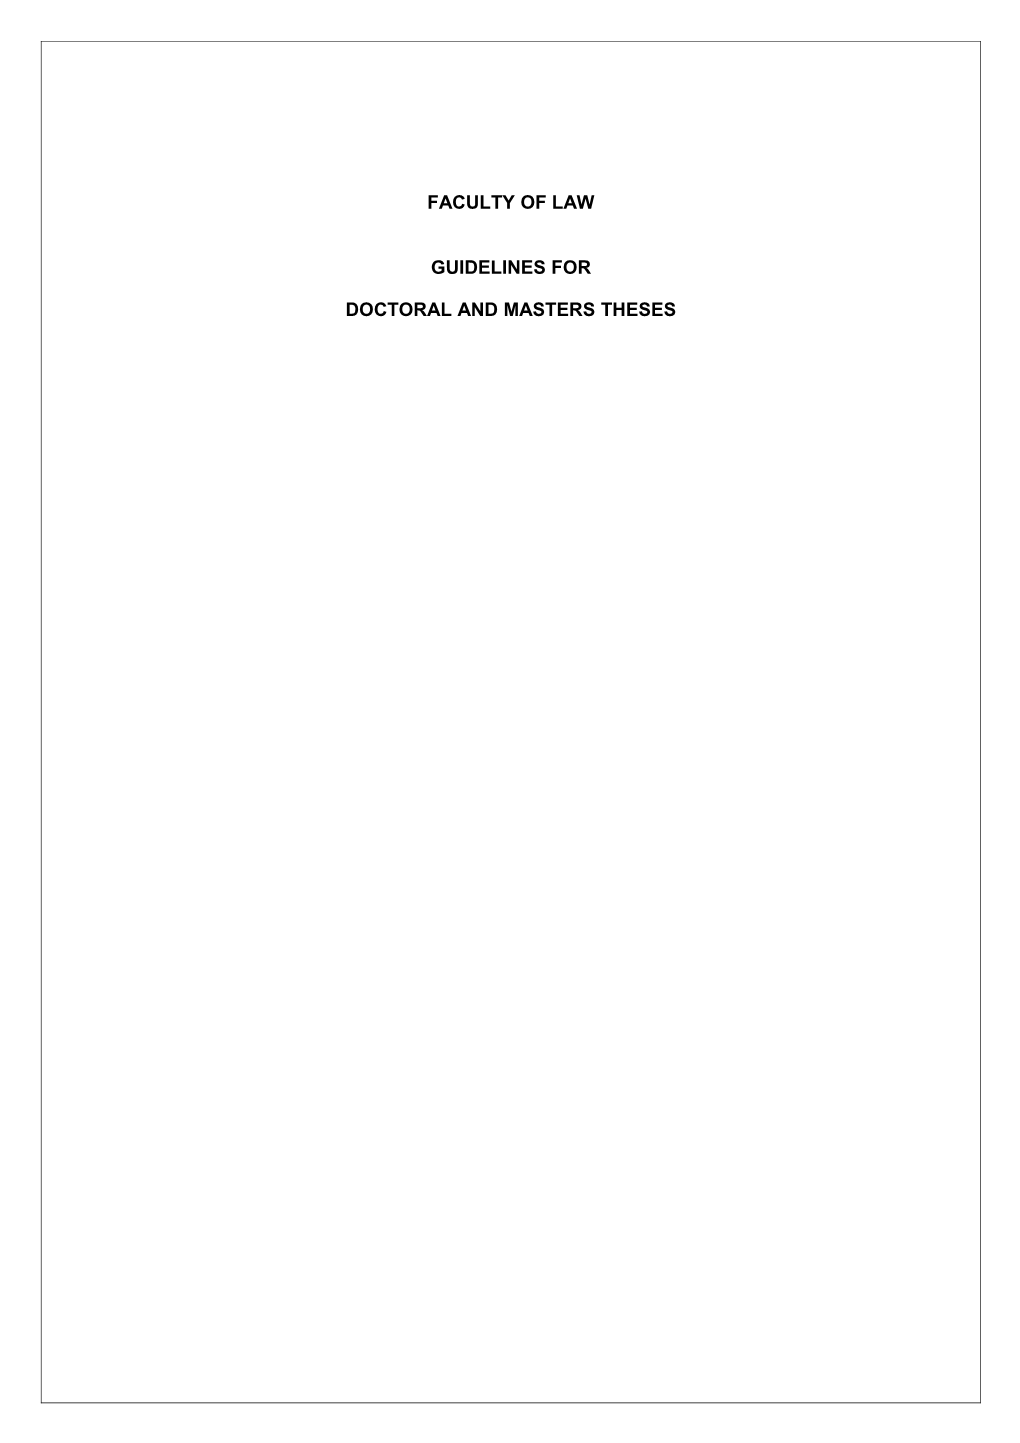 Doctoral and Masters Theses